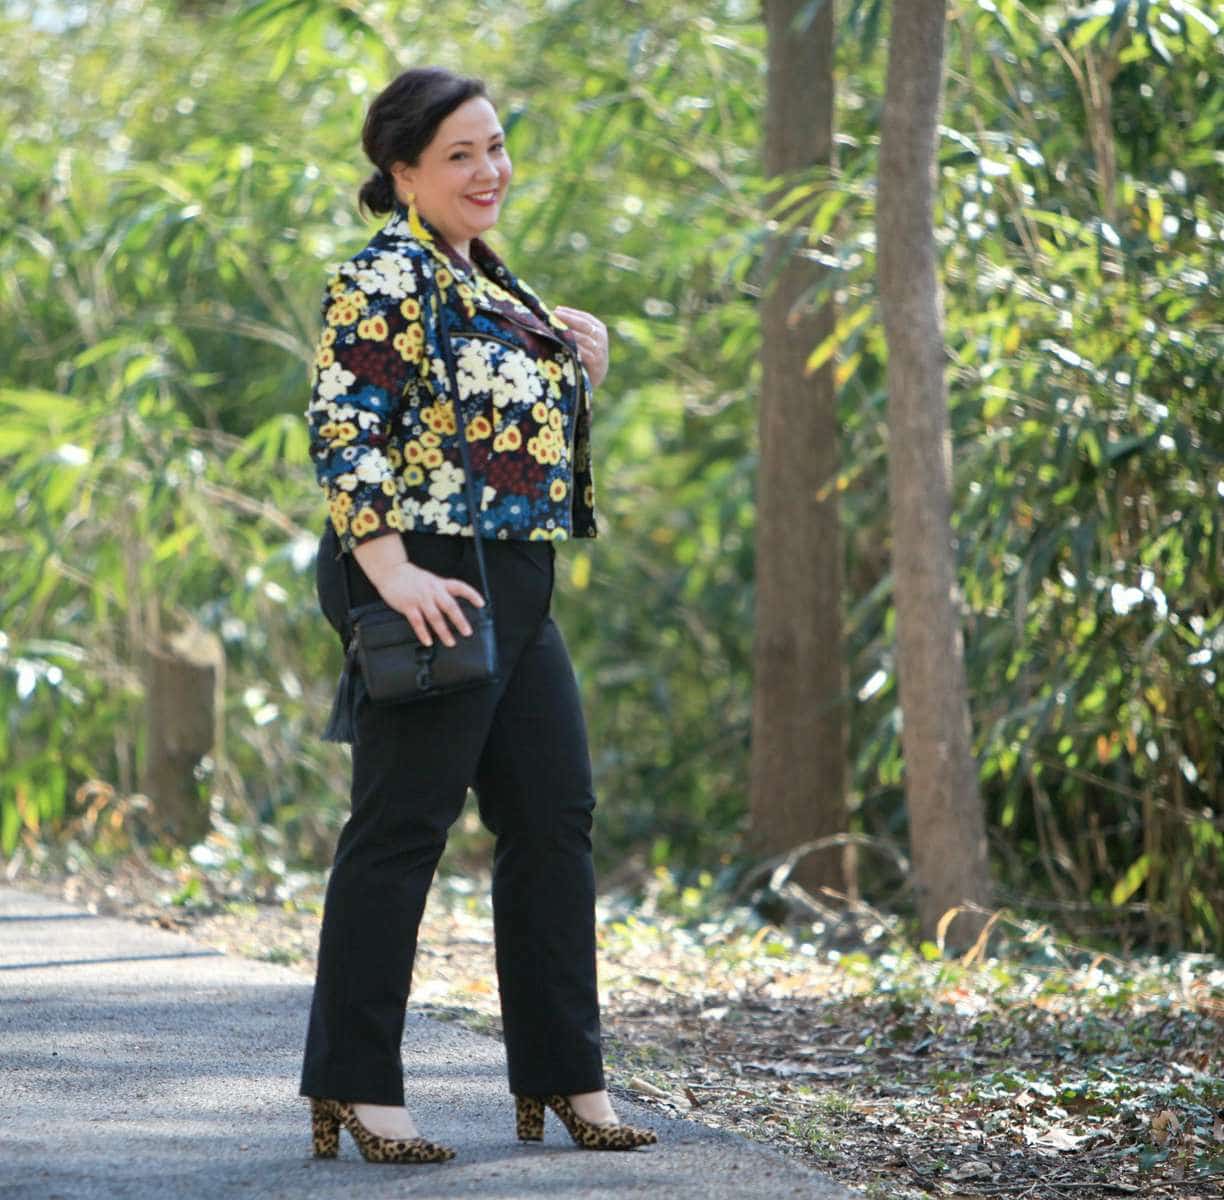 Wardrobe Oxygen wearing a Rachel Roy floral moto jacket via Gwynnie Bee with leopard haircalf pumps and Ray-Ban 62mm aviators